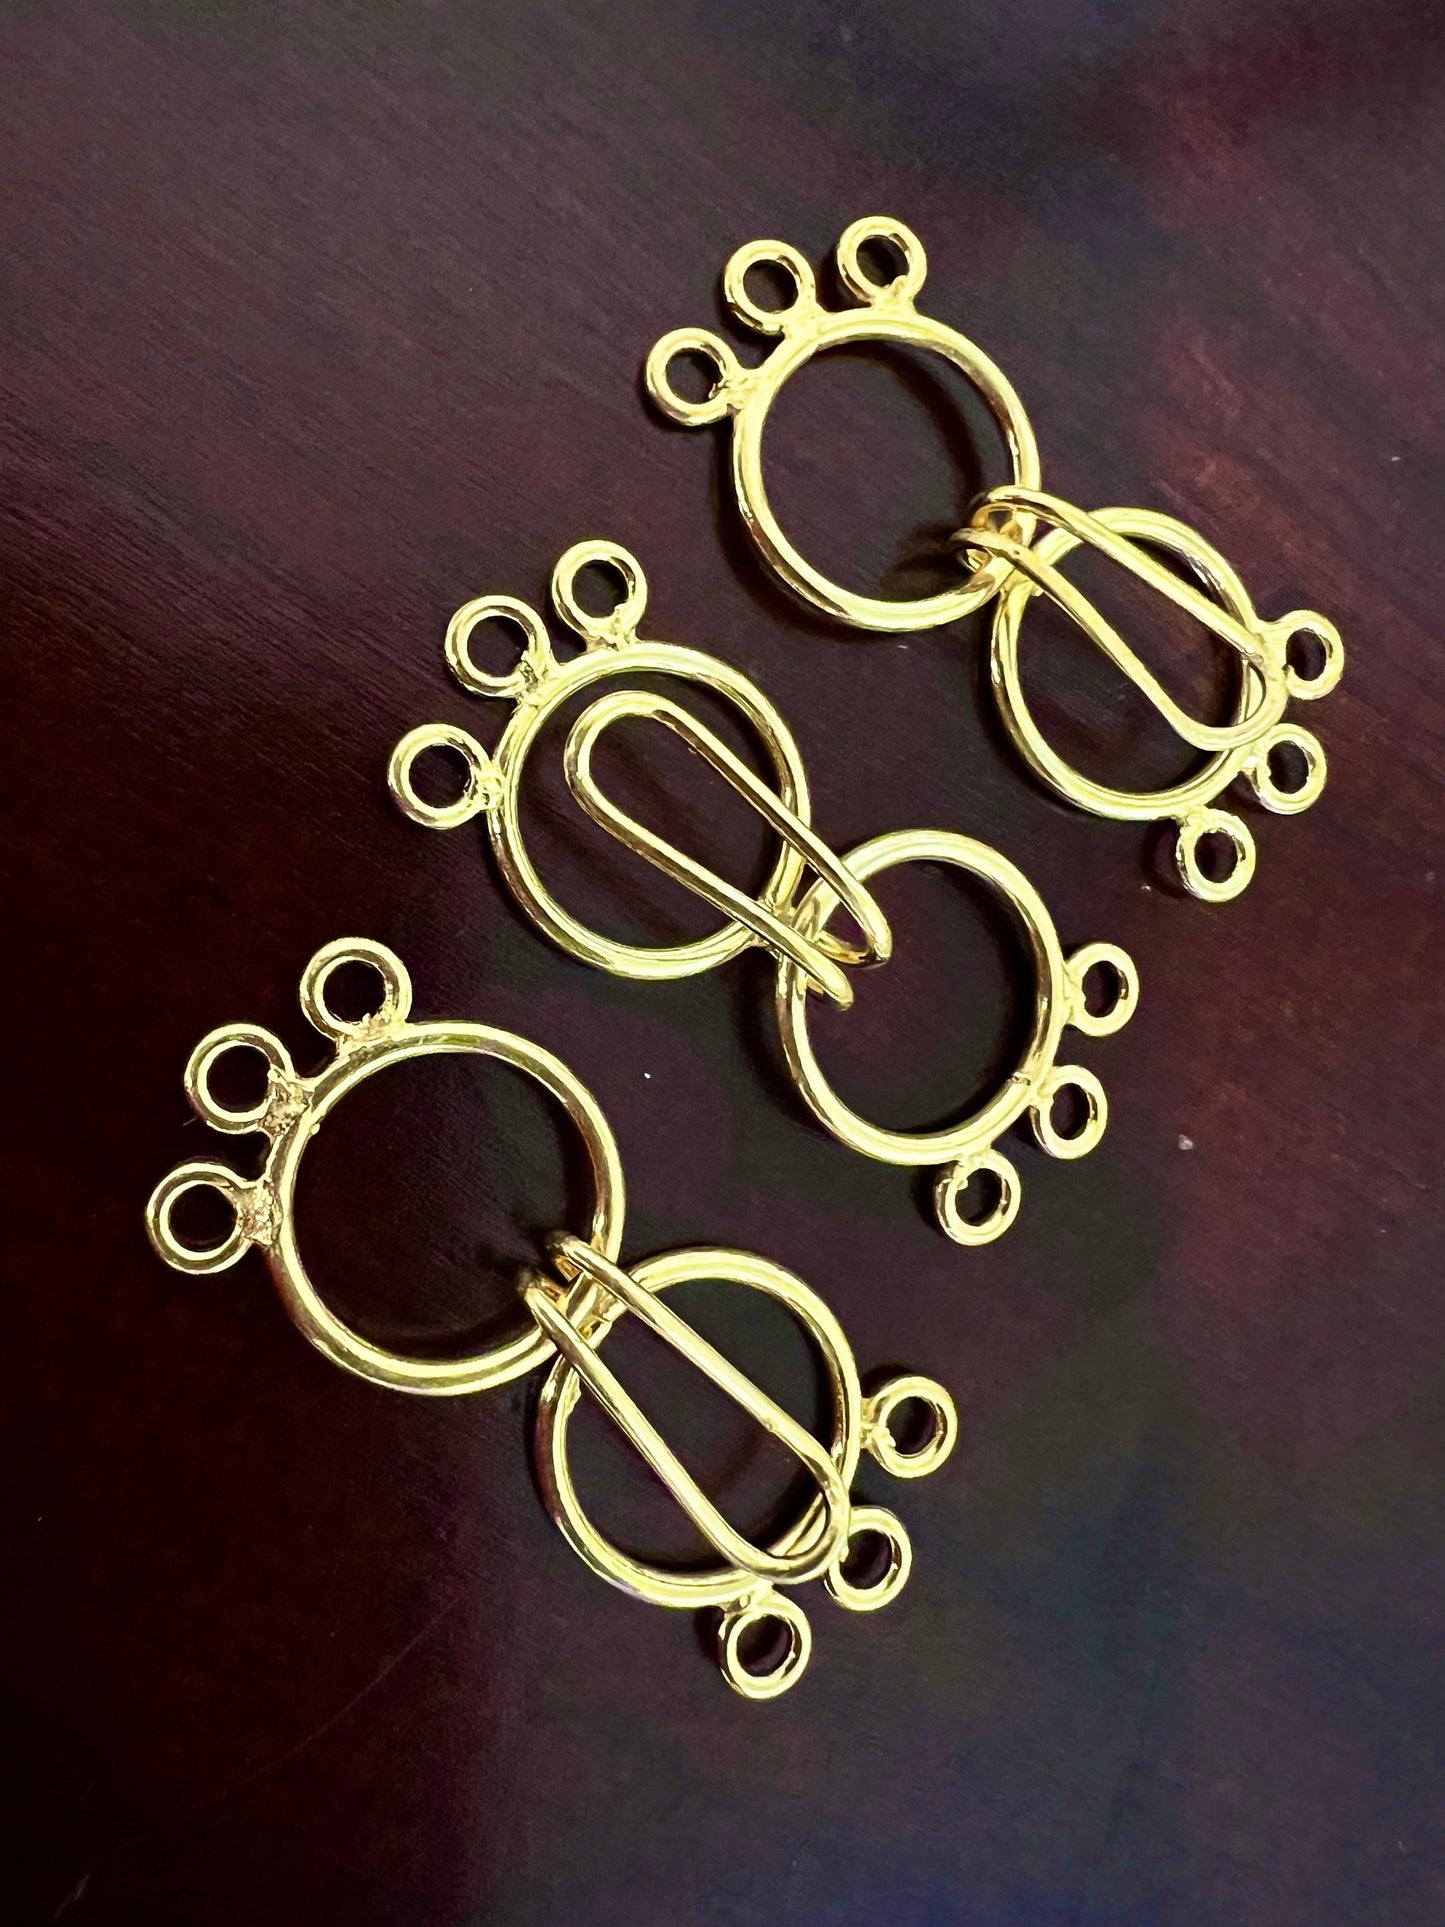 22k gold vermeil Bali 3 loop hook and eye 17mm each circle, 38mm long with both circle. Jewelry making multi line handmade clasp 1 set